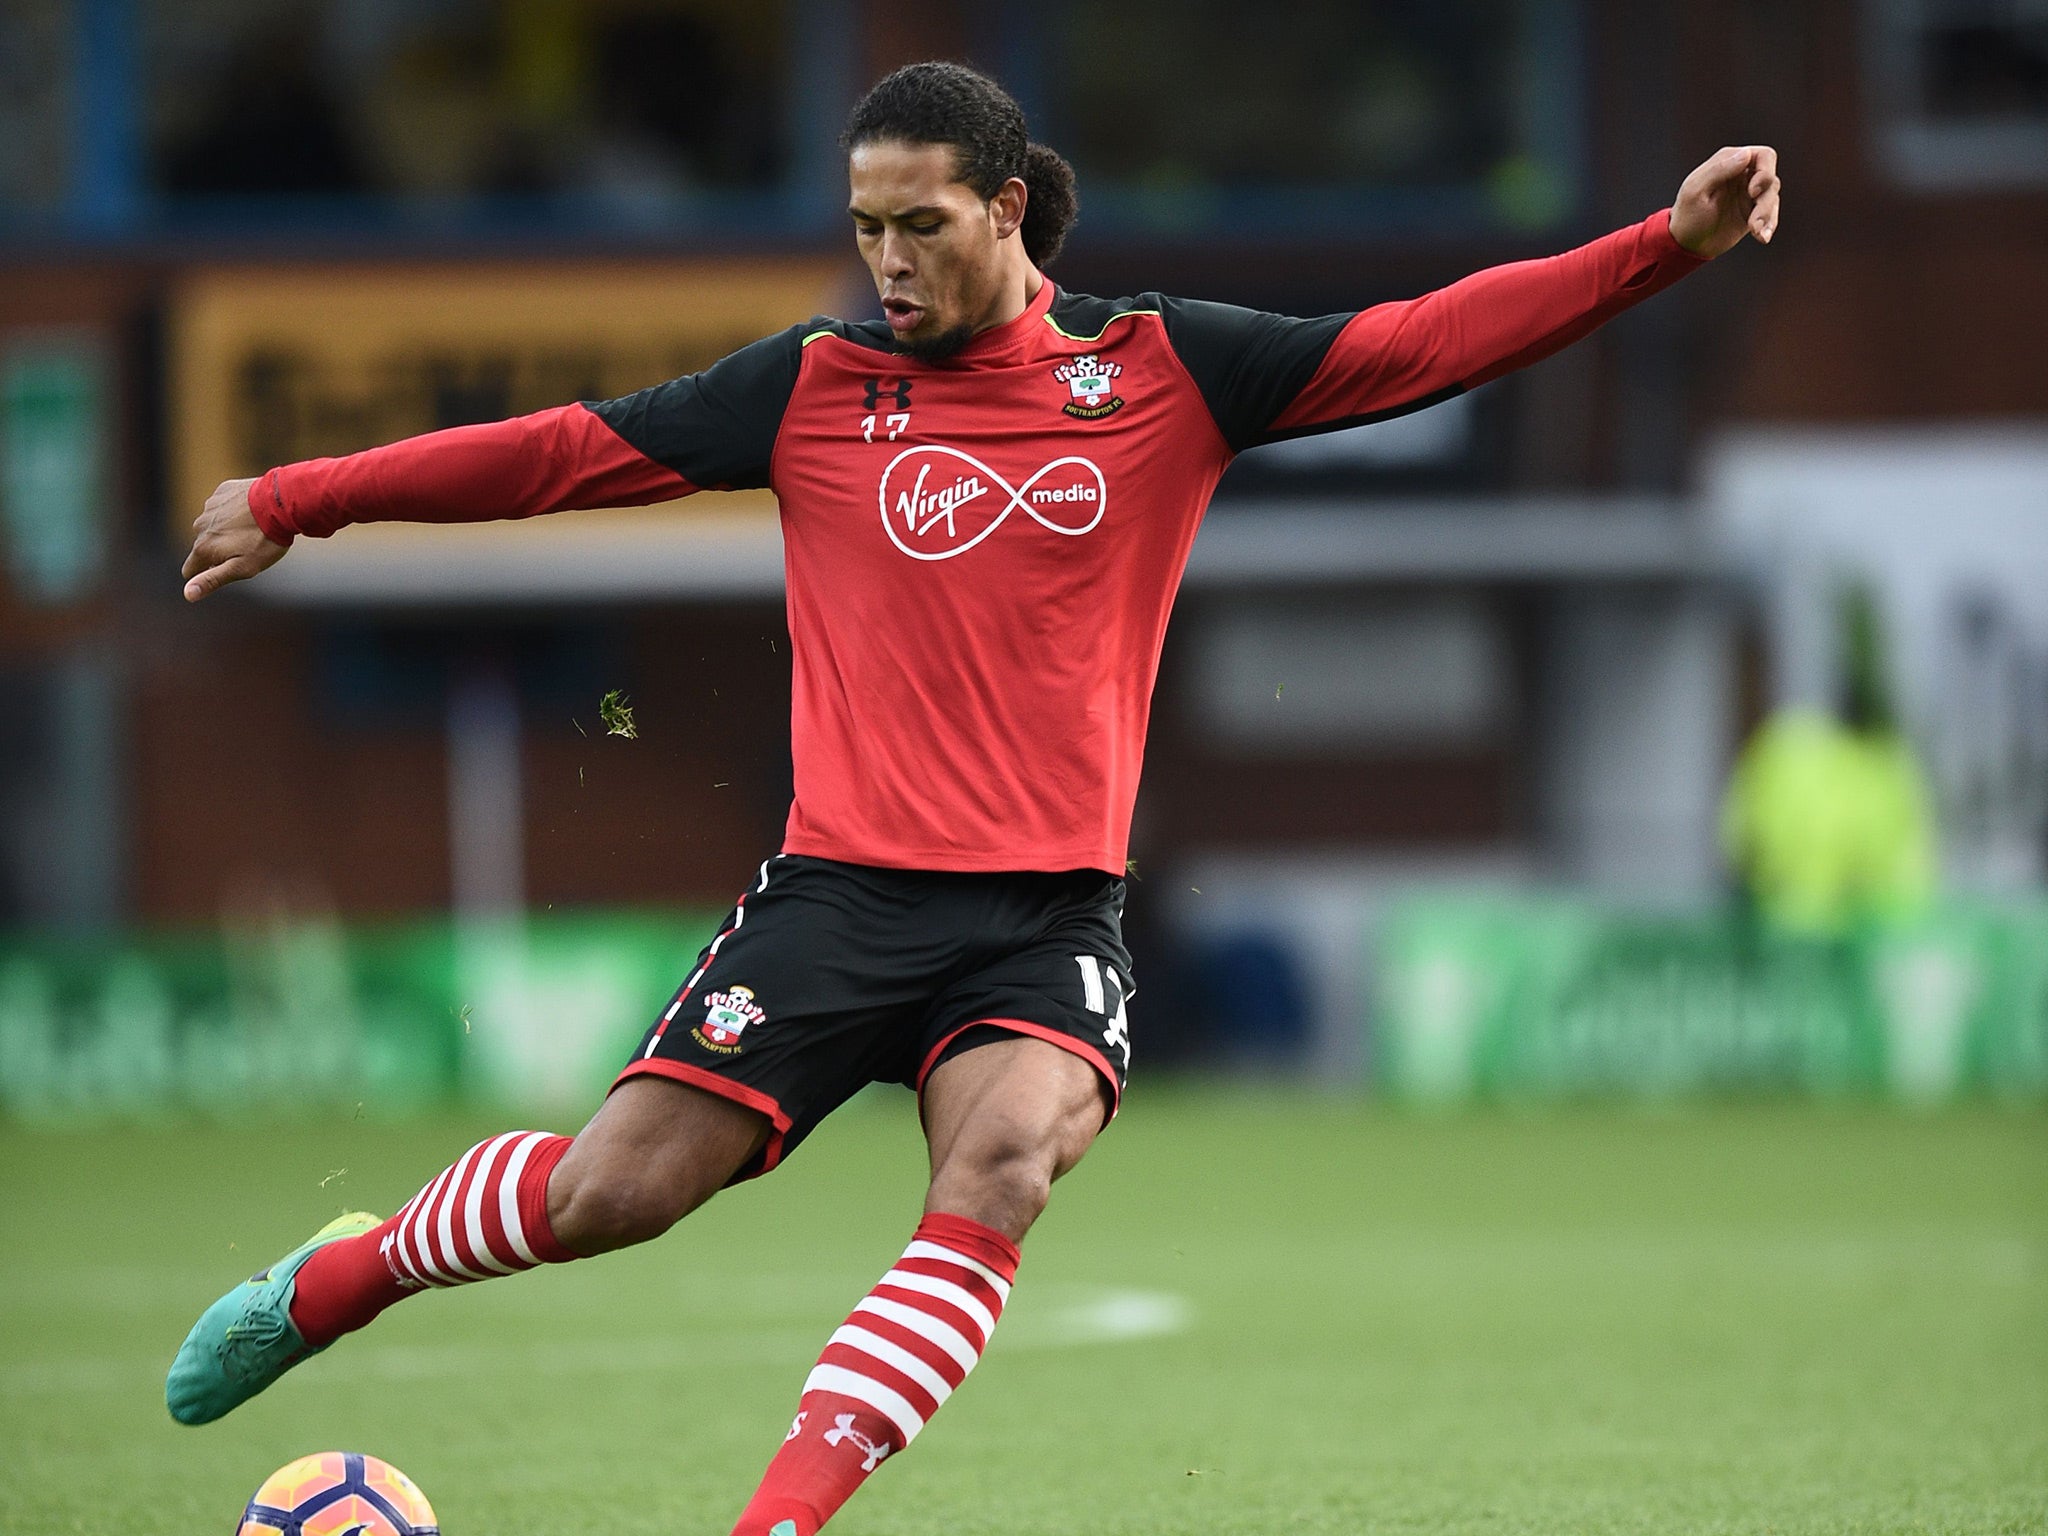 Southampton are confident that Virgil van Dijk will stay with them into the new season